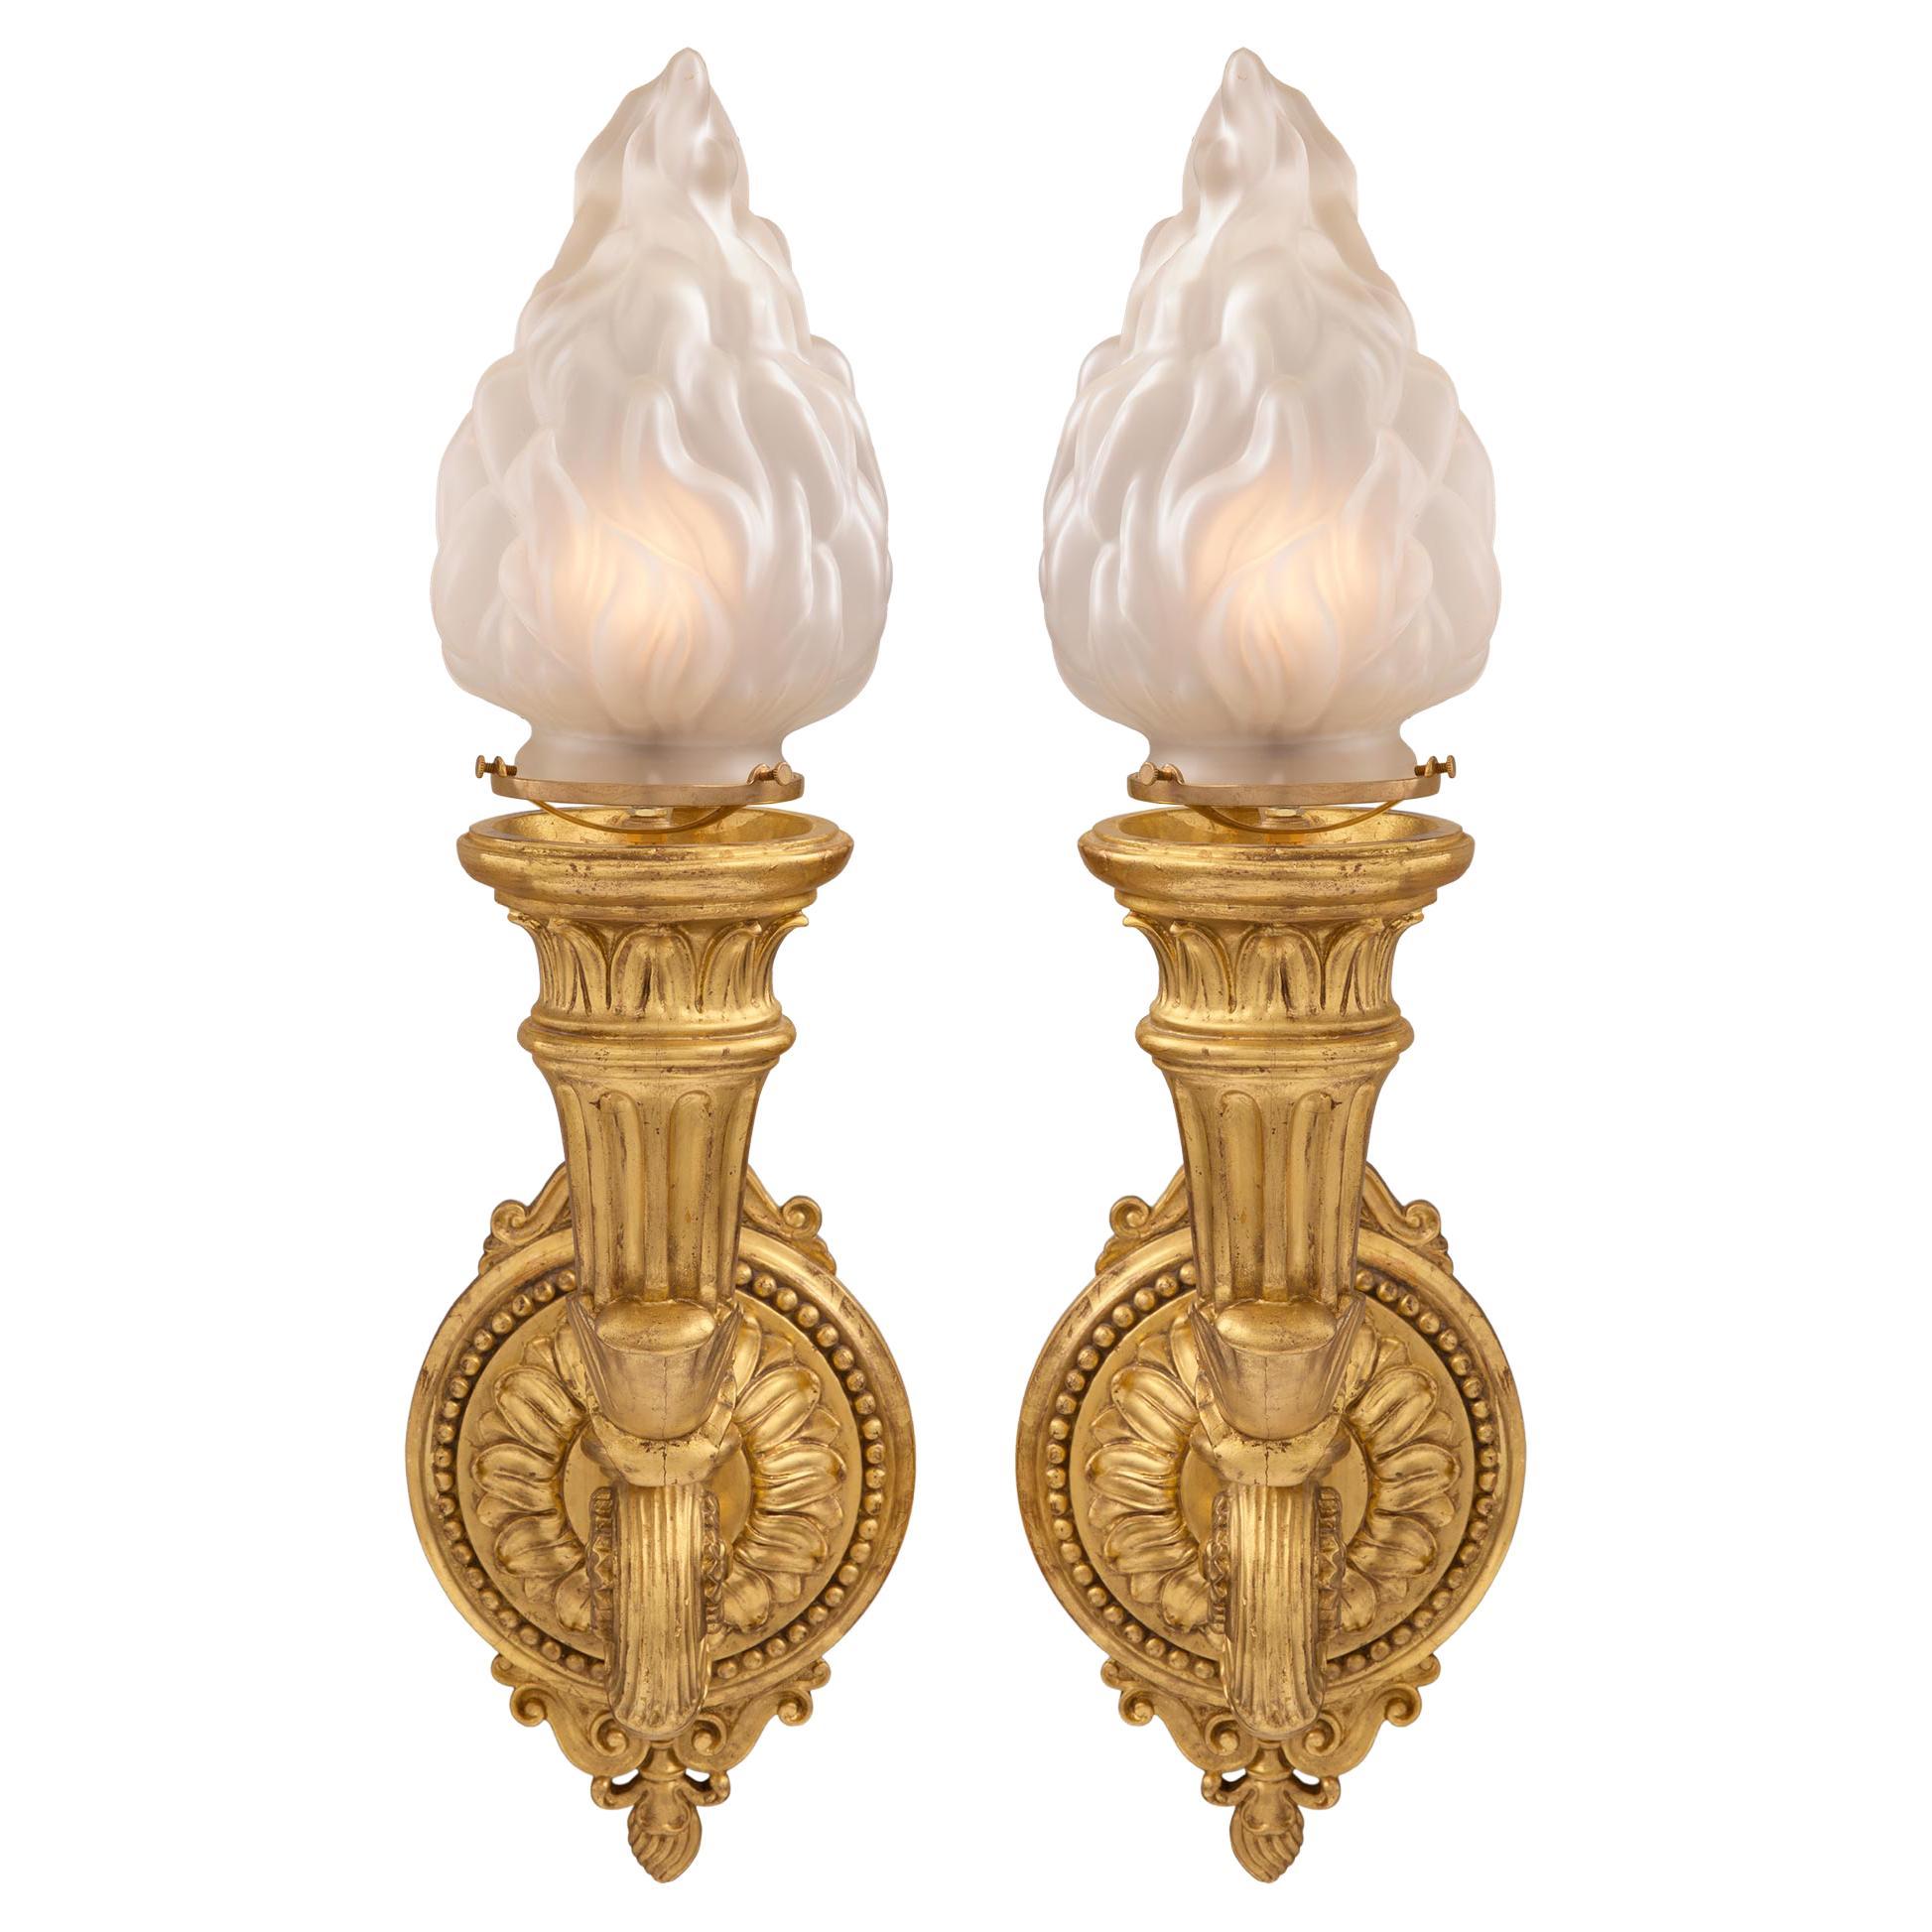 Pair of Italian 19th Century Neoclassical Style Giltwood and Glass Sconces